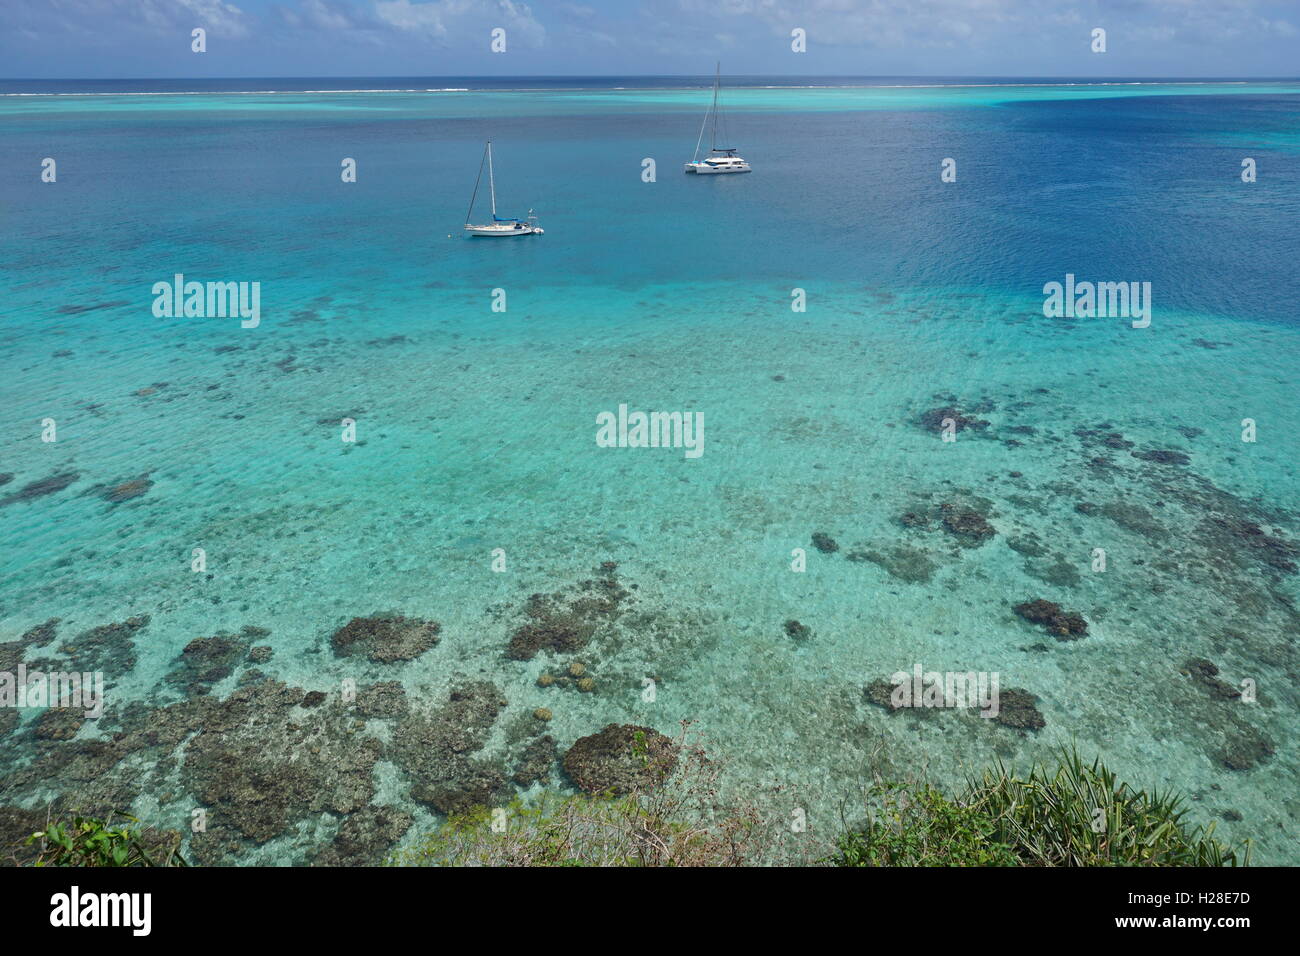 Aerial view over the lagoon with two boats anchored, south Pacific ocean, Huahine island, French Polynesia Stock Photo